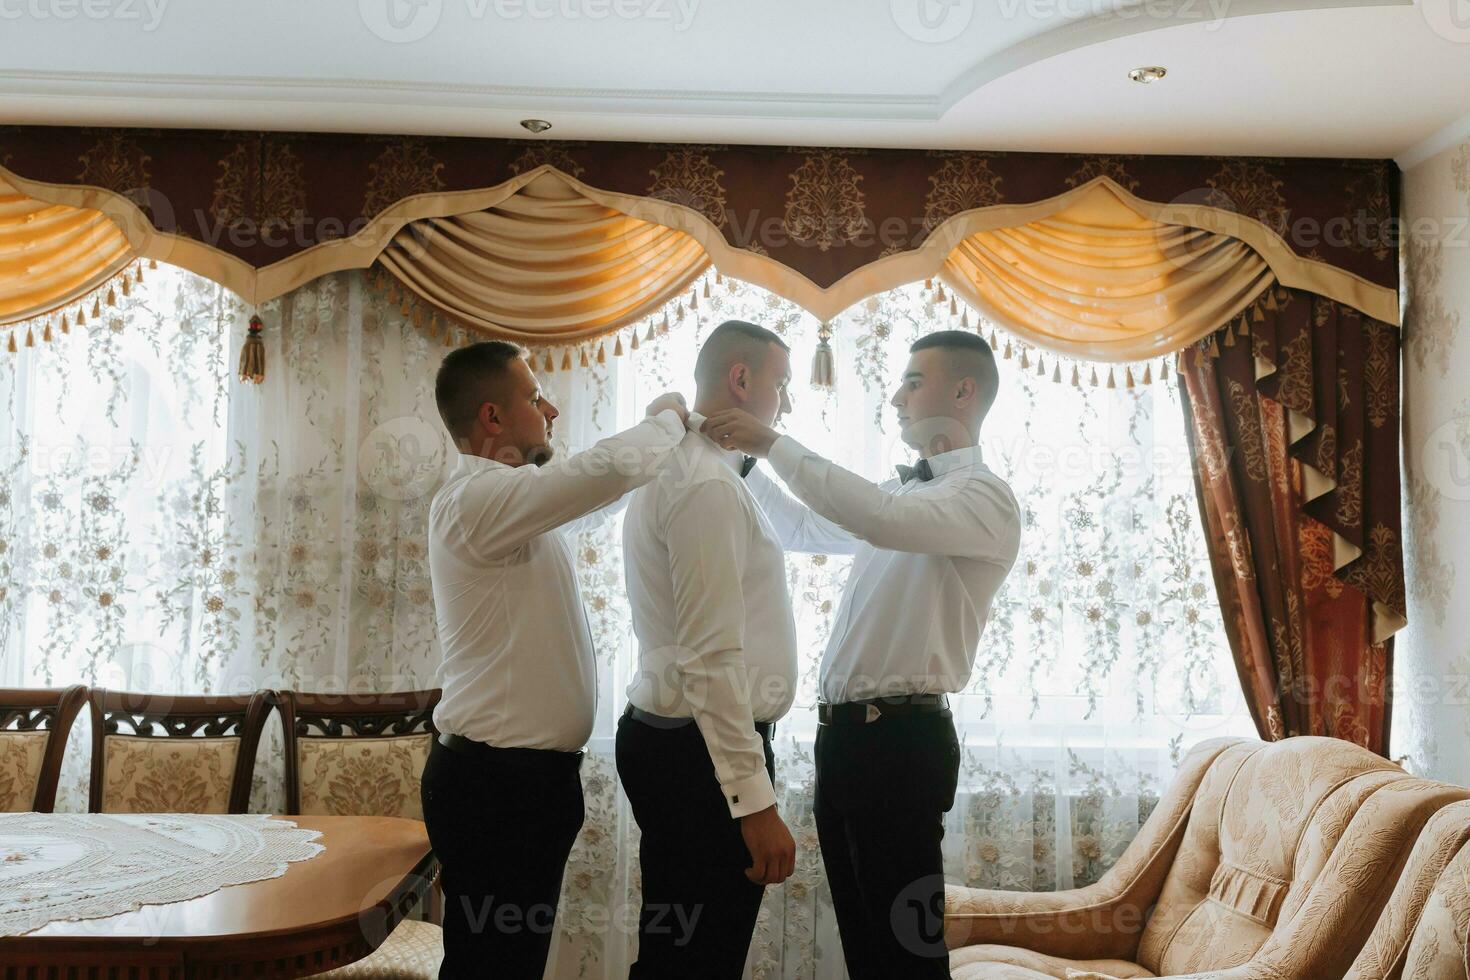 Wedding photography. Friends help the groom get dressed. Groom's morning. Style. Fashion. The same clothes photo